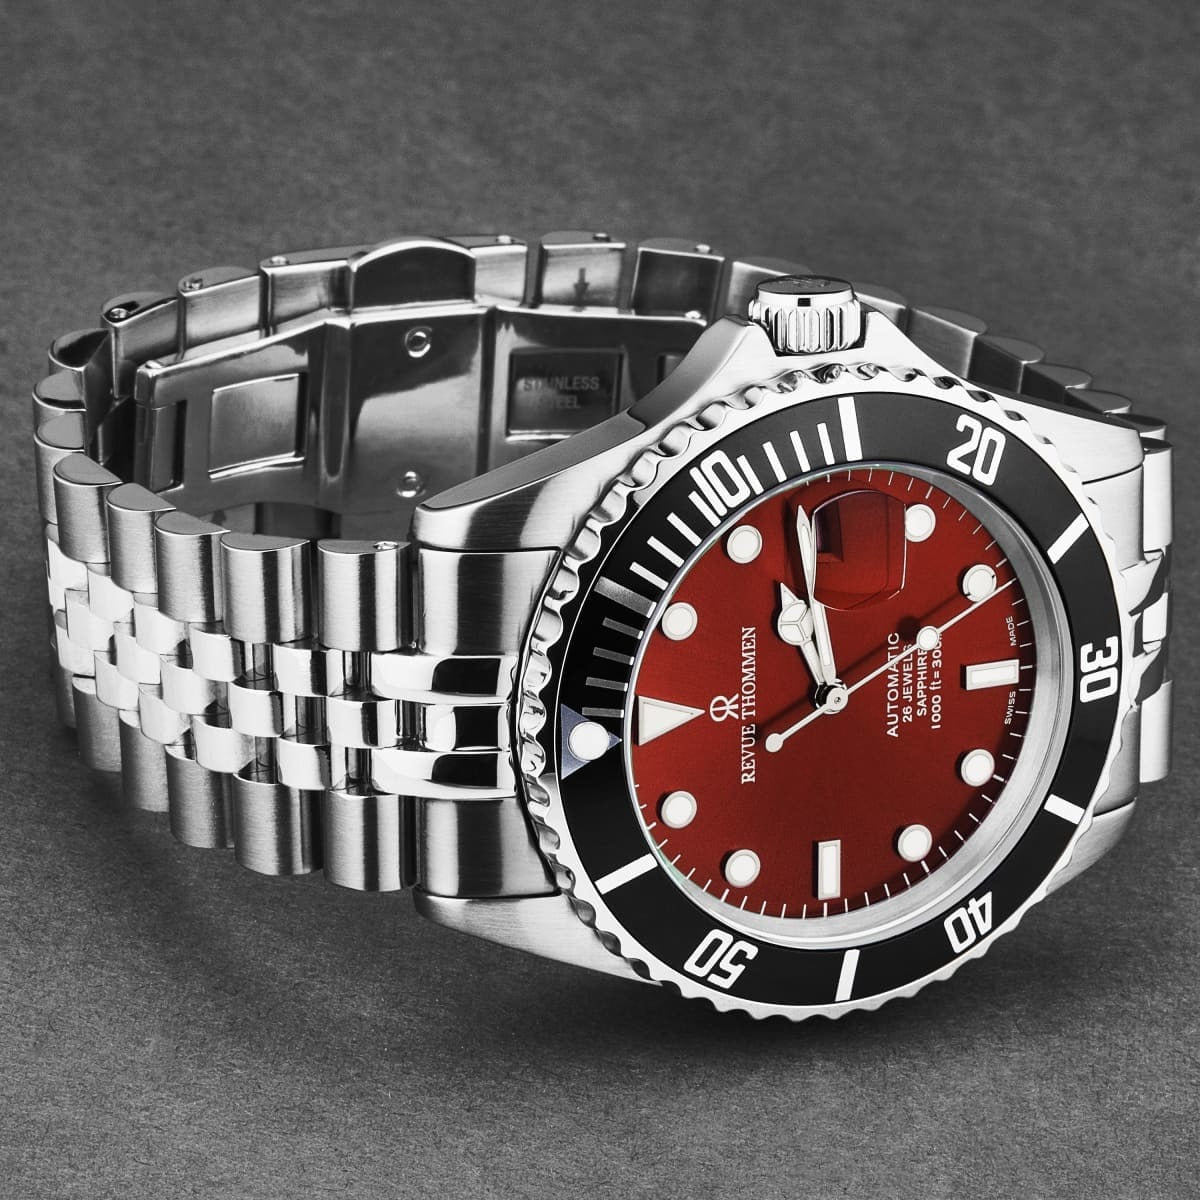 Revue Thommen Men's 'Diver' Red Dial Stainless Steel Bracelet Automatic Watch 17571.2238